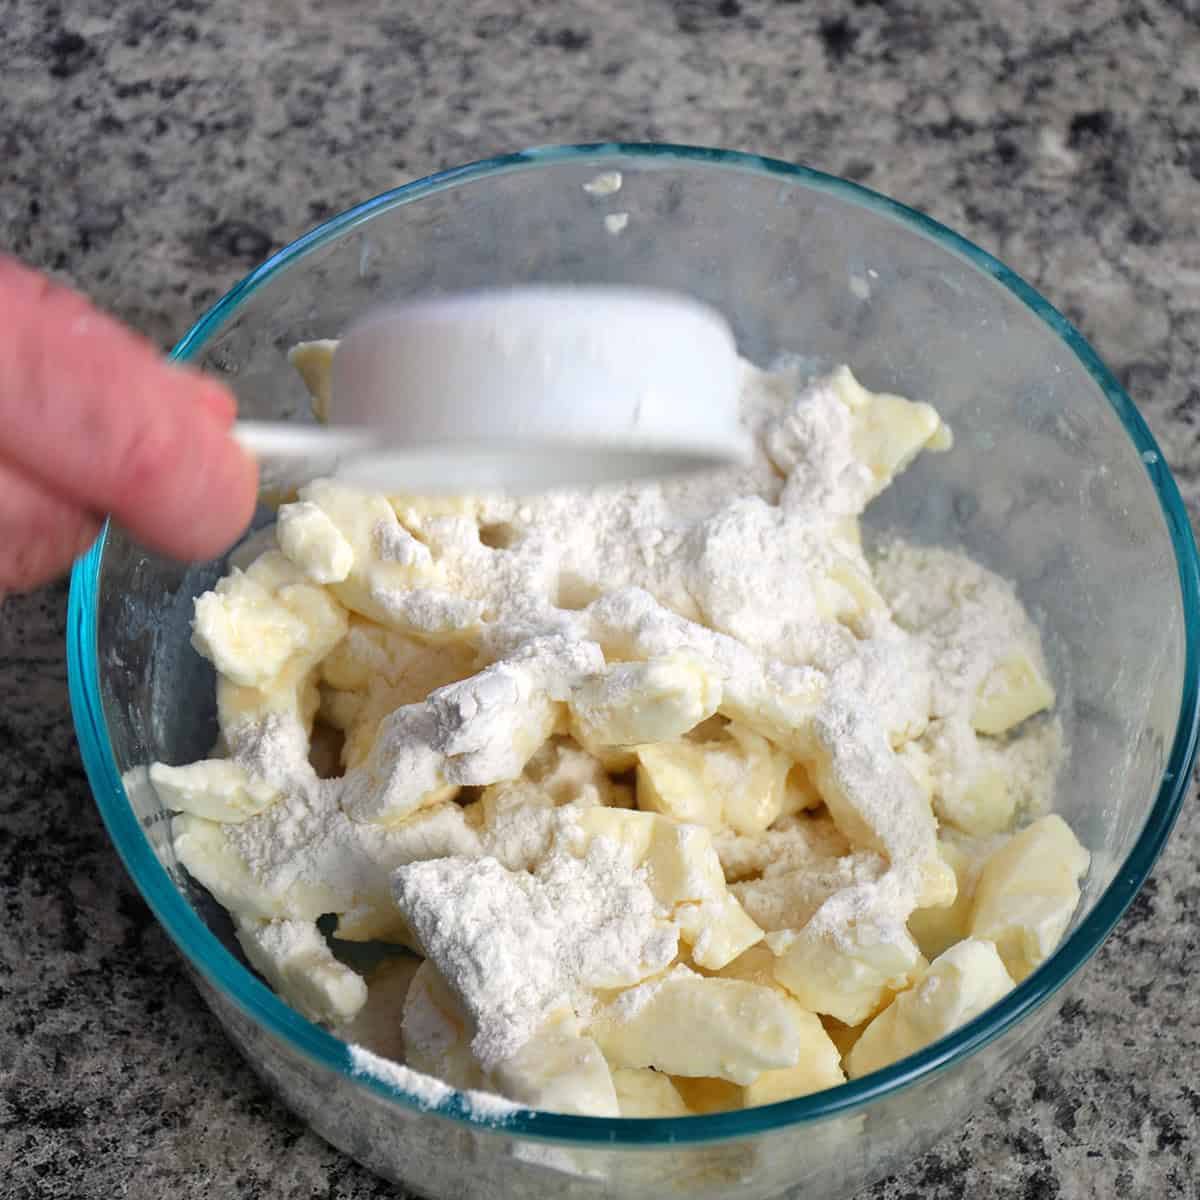 Chedder cheese curds in bowl with flour.